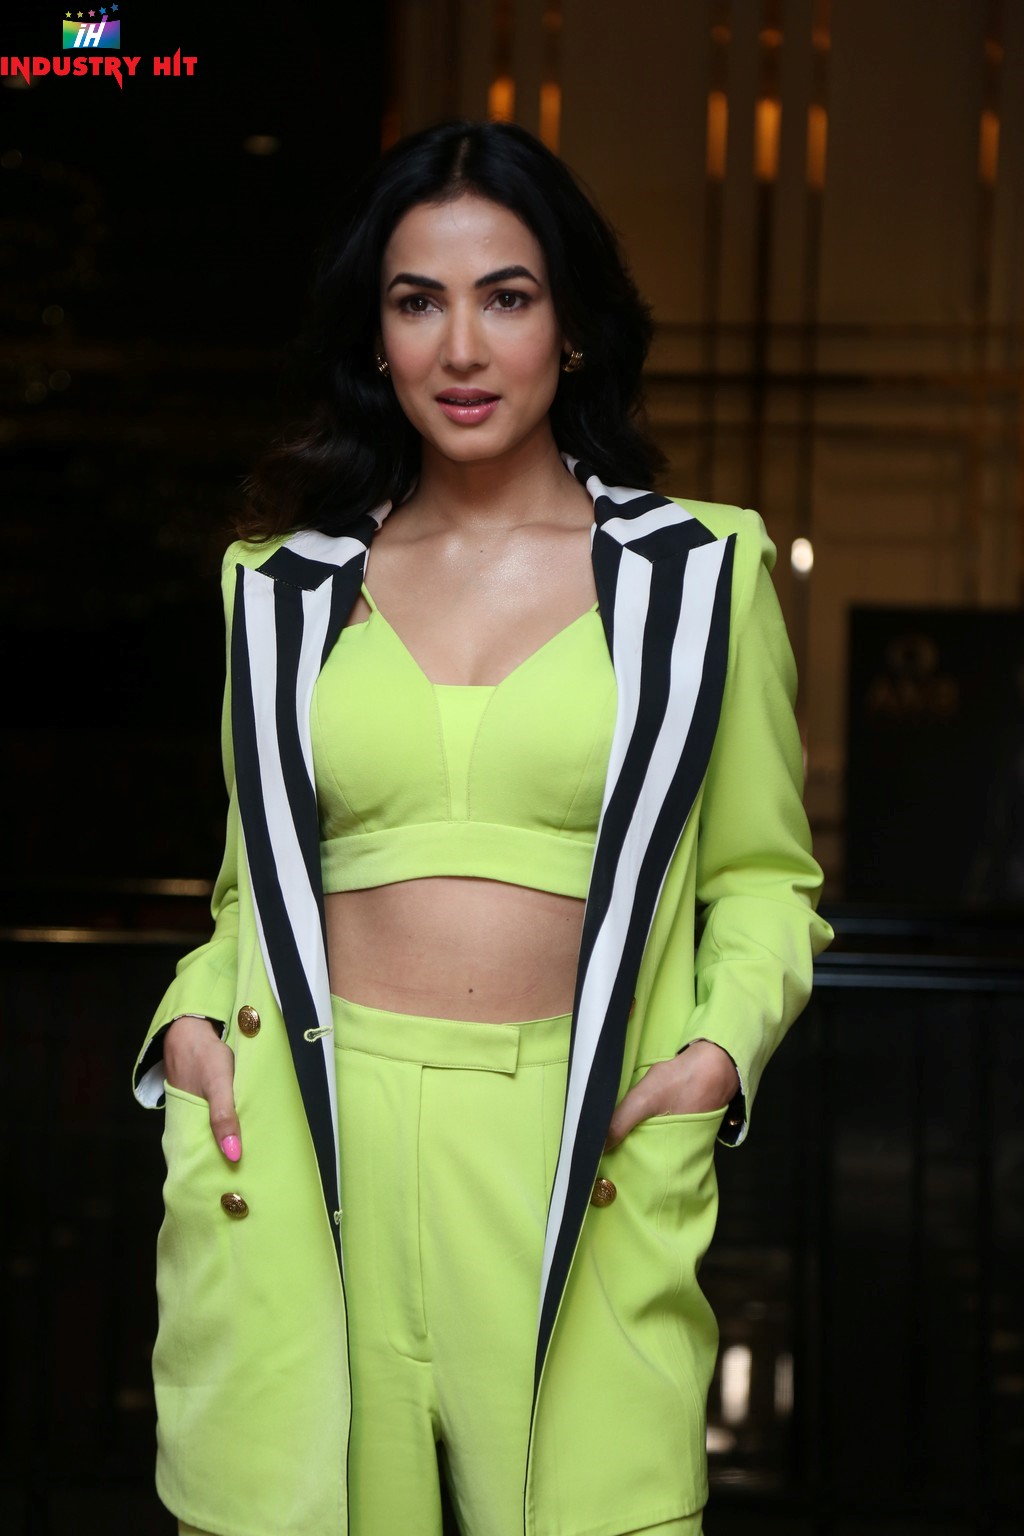 Sonal-Chauhan-The-Ghost-IndustryHit-1